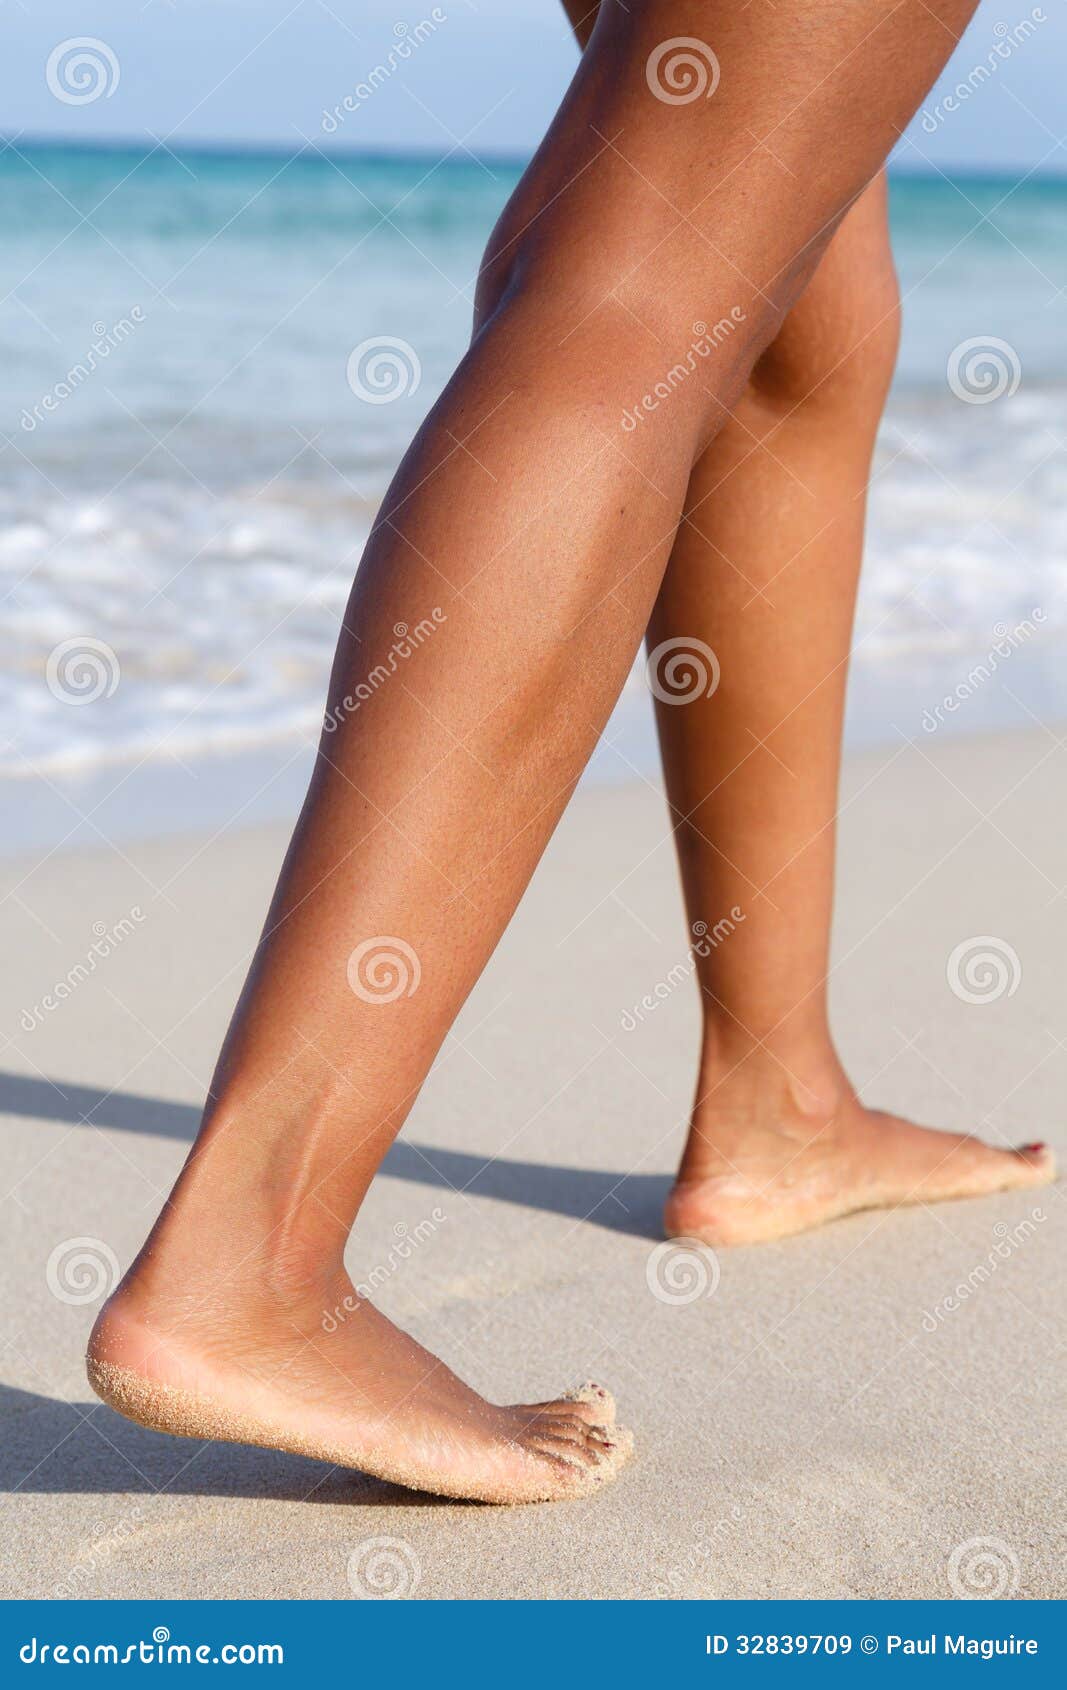 Calf Muscle Of Woman Royalty Free Stock Images - Image: 32839709